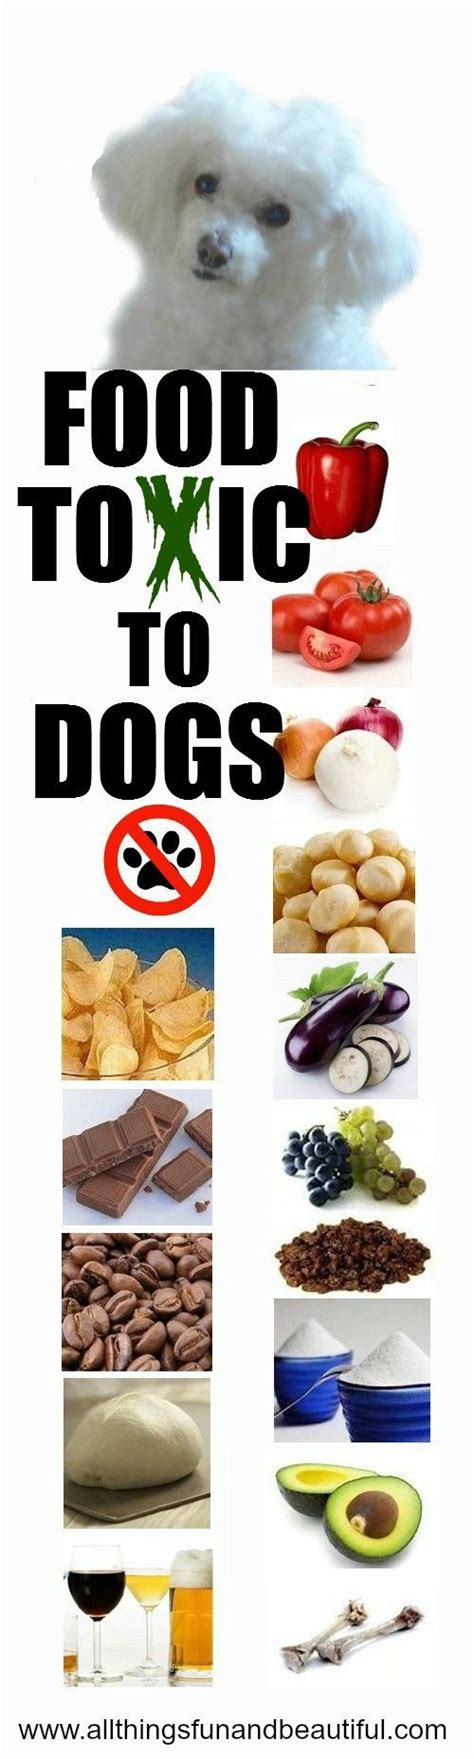 You can find us at our retail kitchens, inside veterinary clinics and hospitals, at pet food express stores in california, and petco locations nationwide. View the list of poisonous foods to avoid, including ...